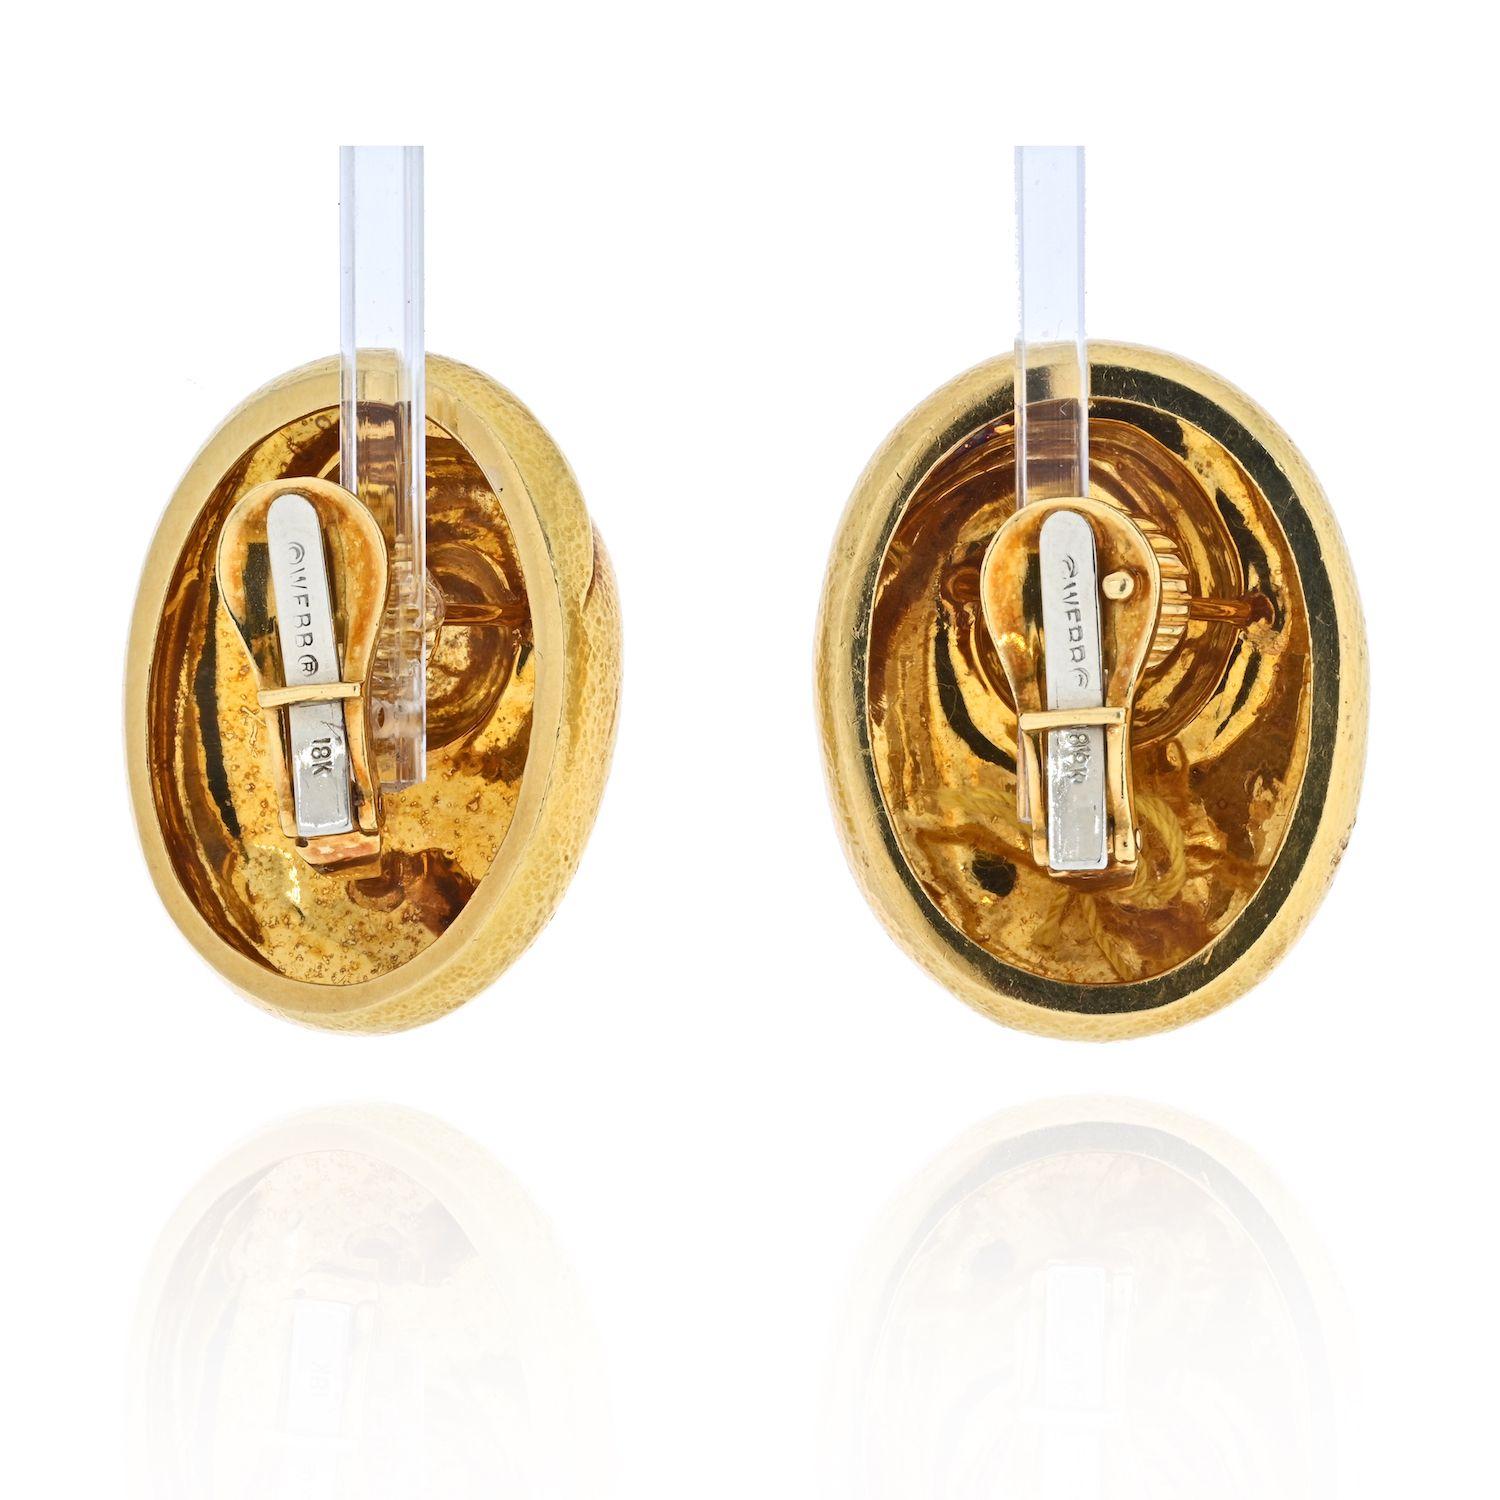 Pair of 18k yellow gold swirl design earrings by David Webb. Earrings are 33mm x 26mm. Marked: Webb, 18k. Weight - 31.2 grams. damage (crack) on gold in one of the earrings.